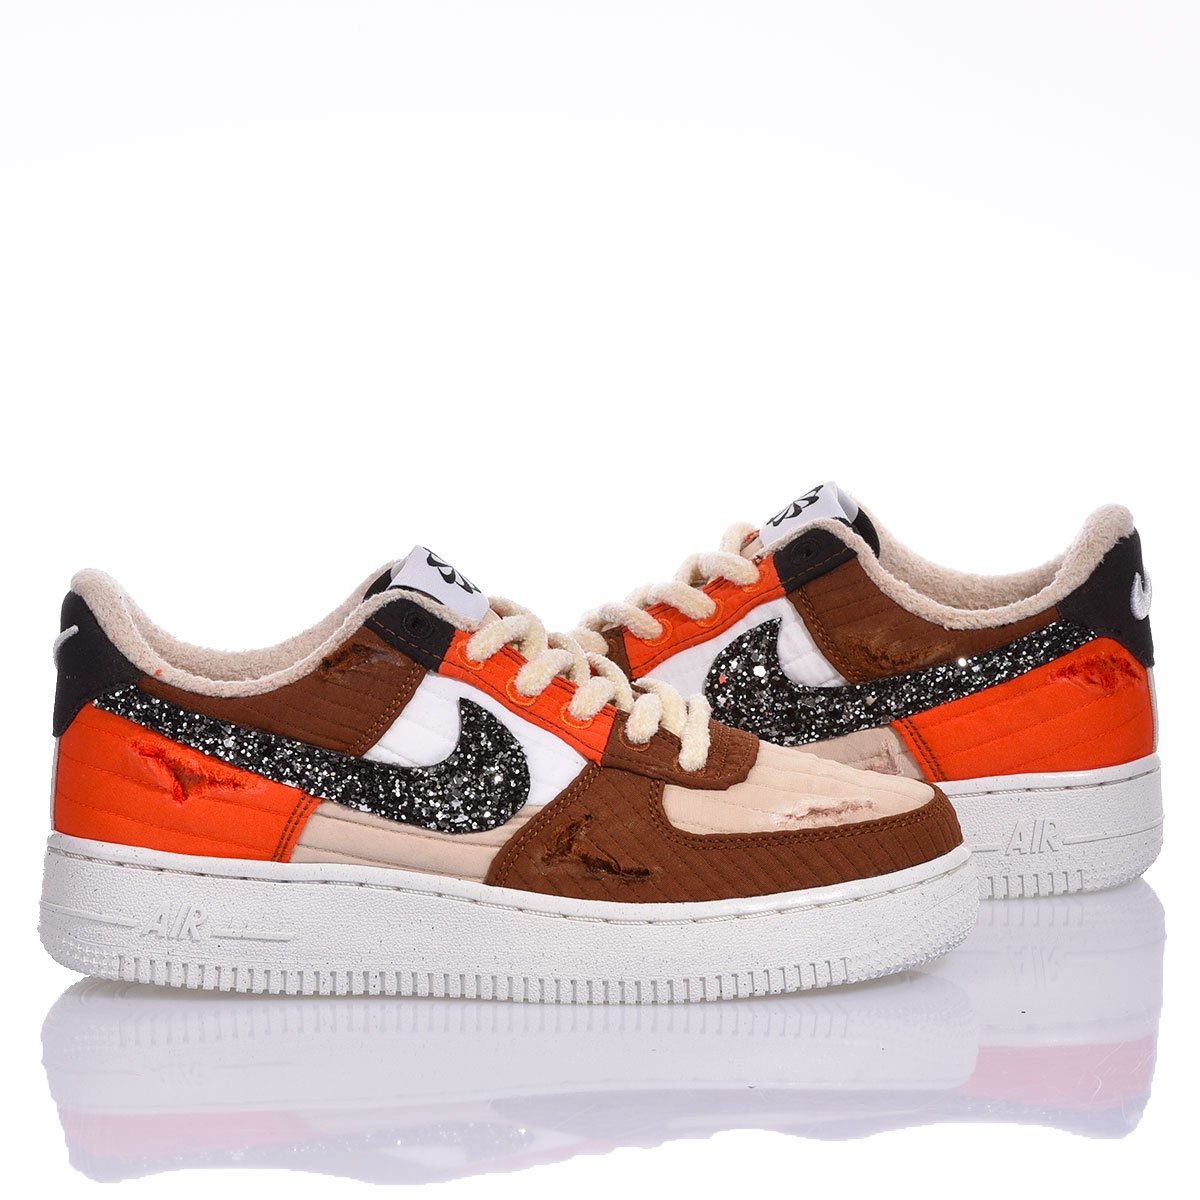 Nike Air Force 1 Chalet Air Force 1 Glitter, Special